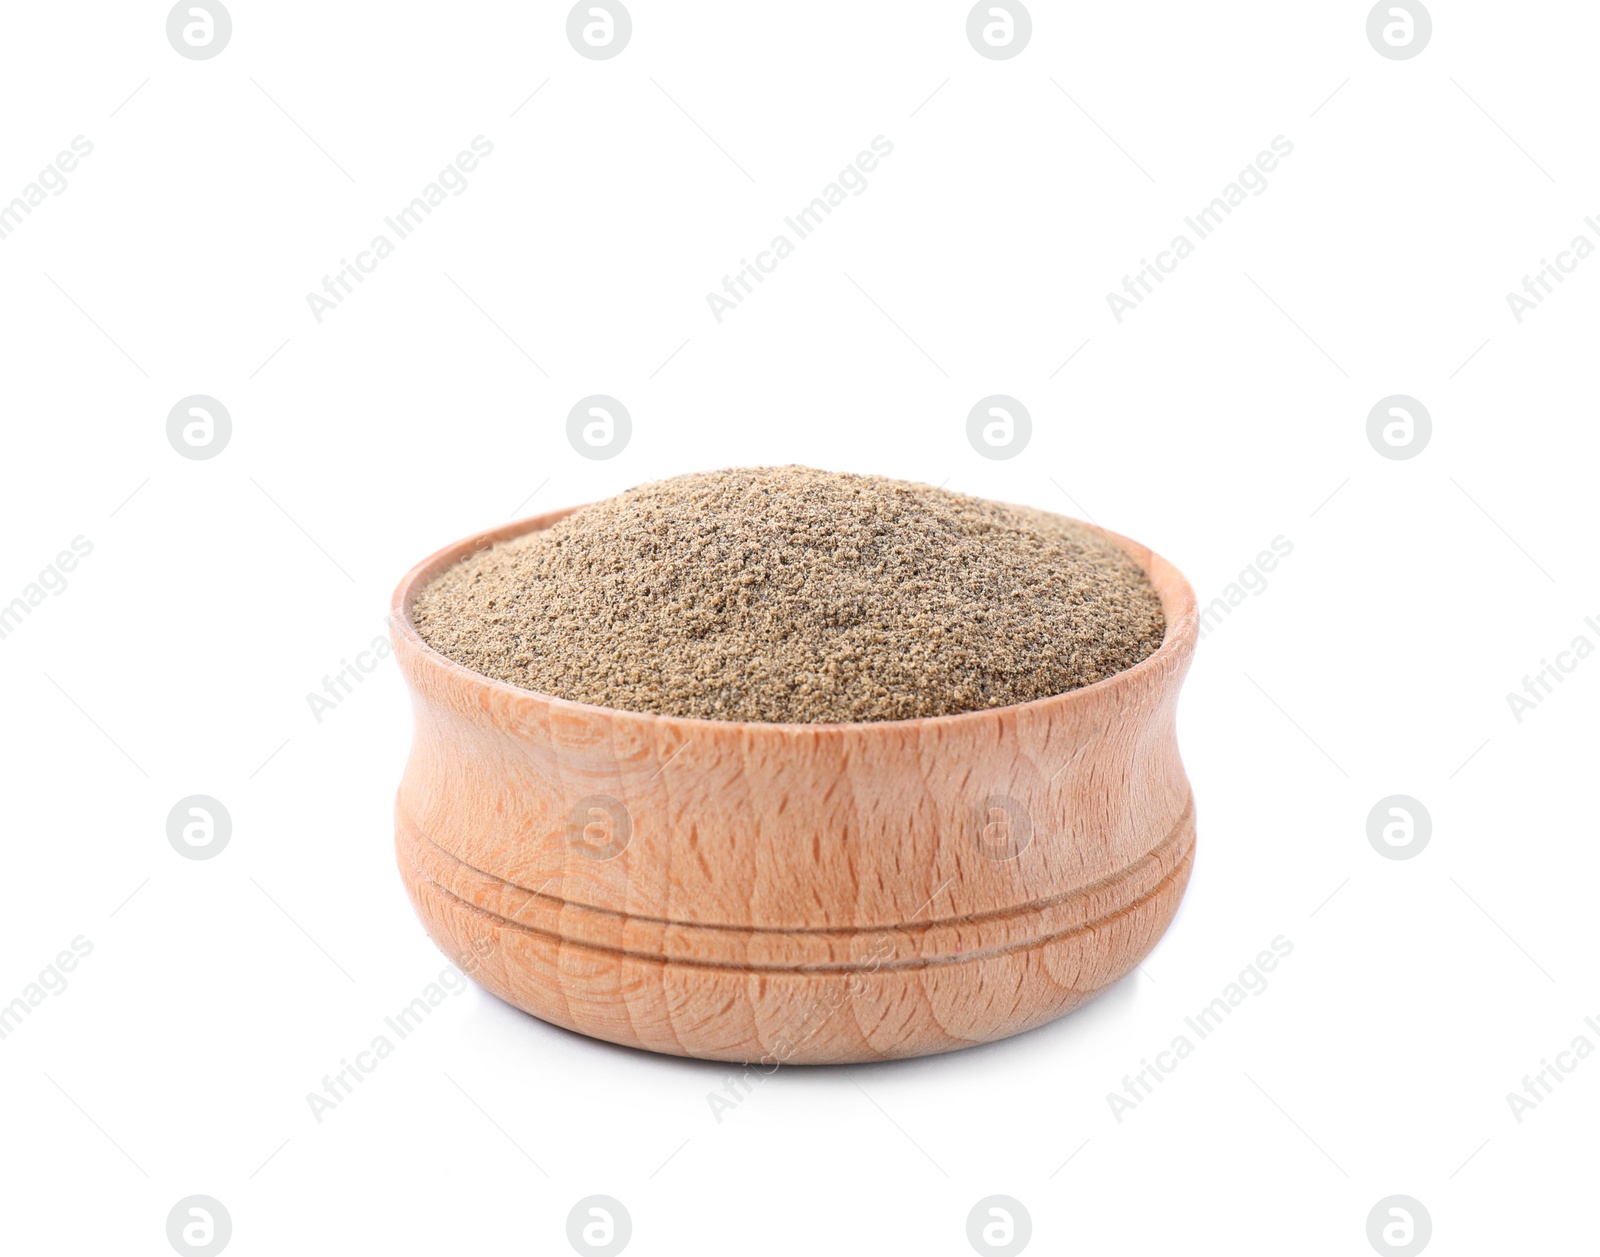 Photo of Milled pepper in wooden bowl isolated on white